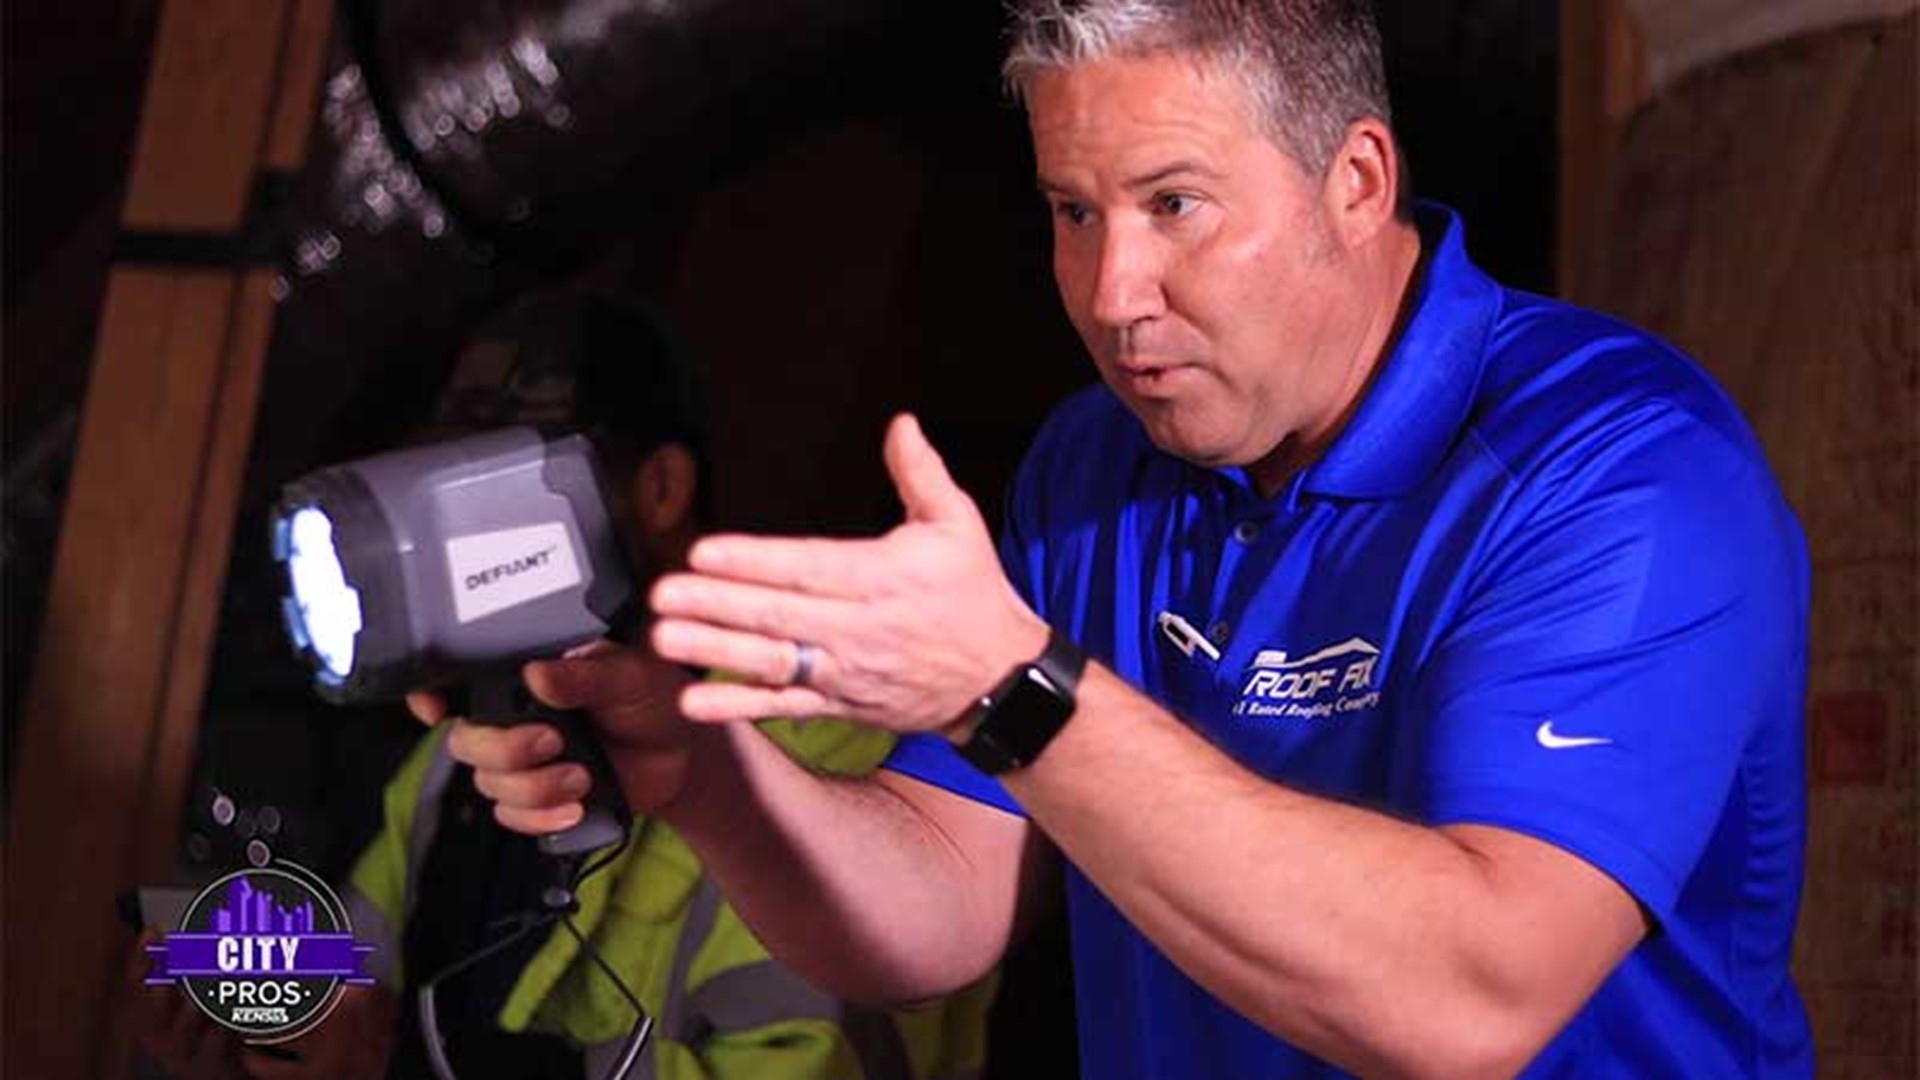 Roof Fix uses thermal imaging technology to find water leaks in hard-to-detect areas, saving homeowners thousands of dollars in costly damages.